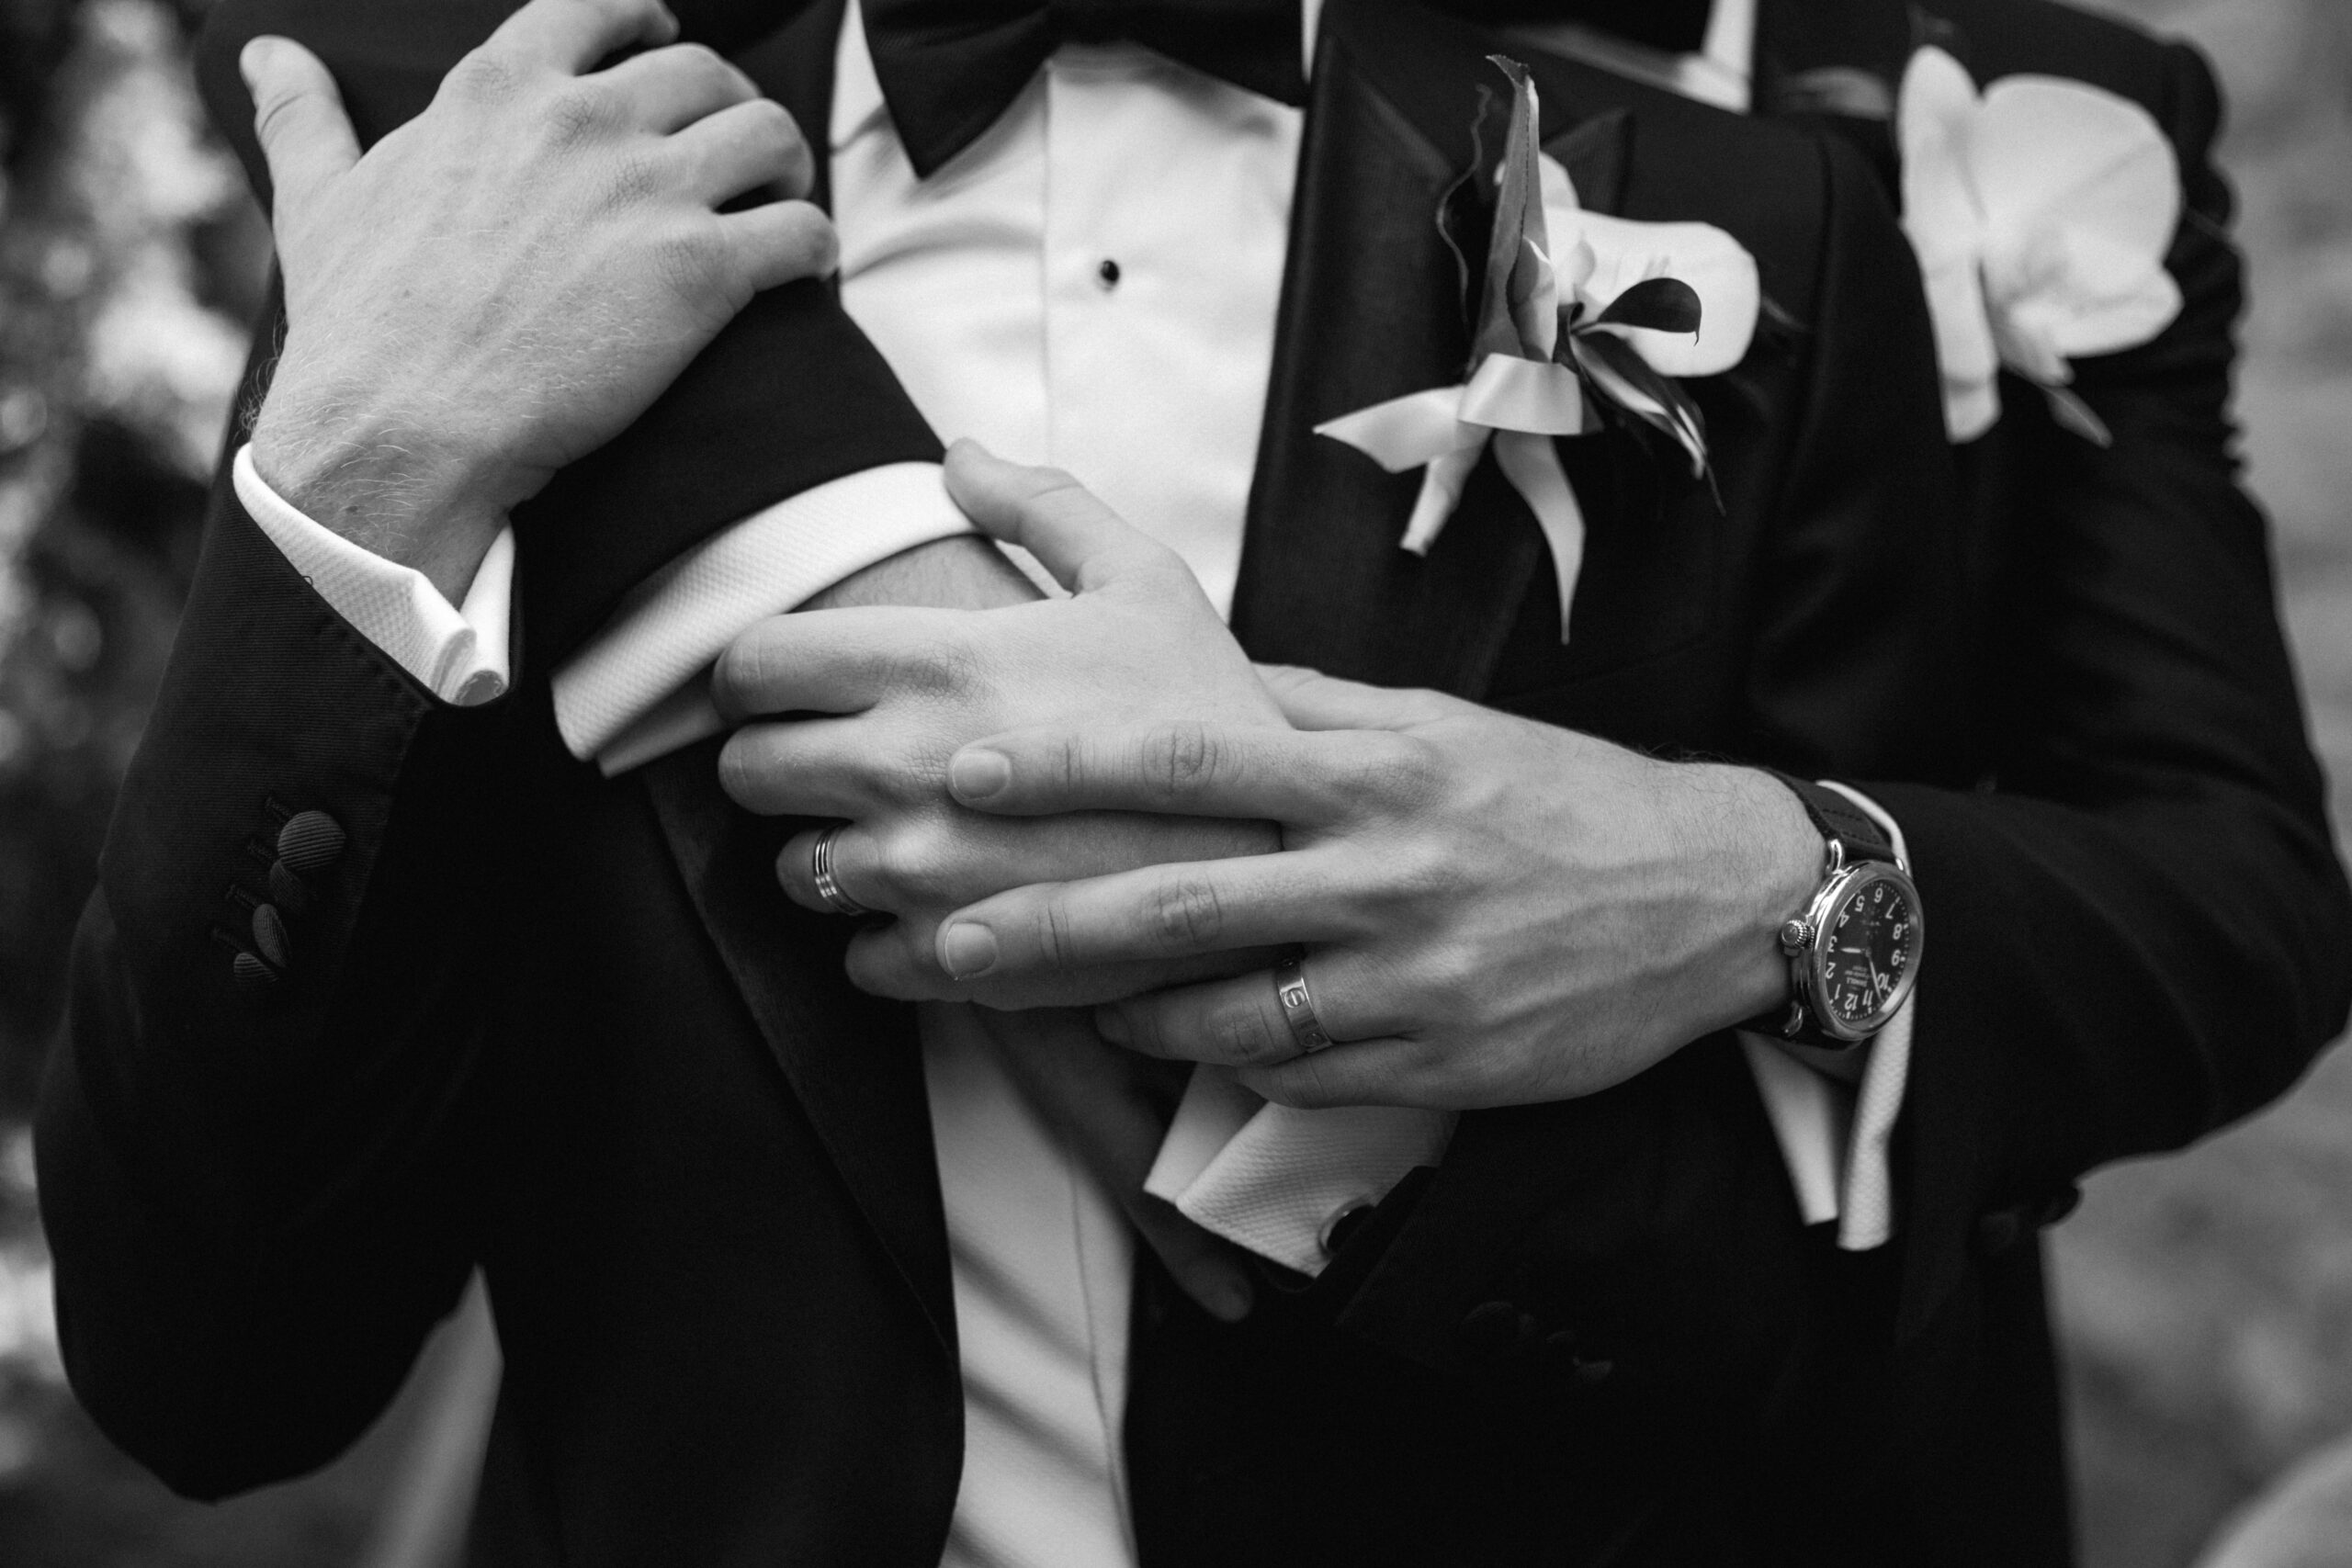 black and white closeup of gay couple back to front embracing their hands and showing wedding bands